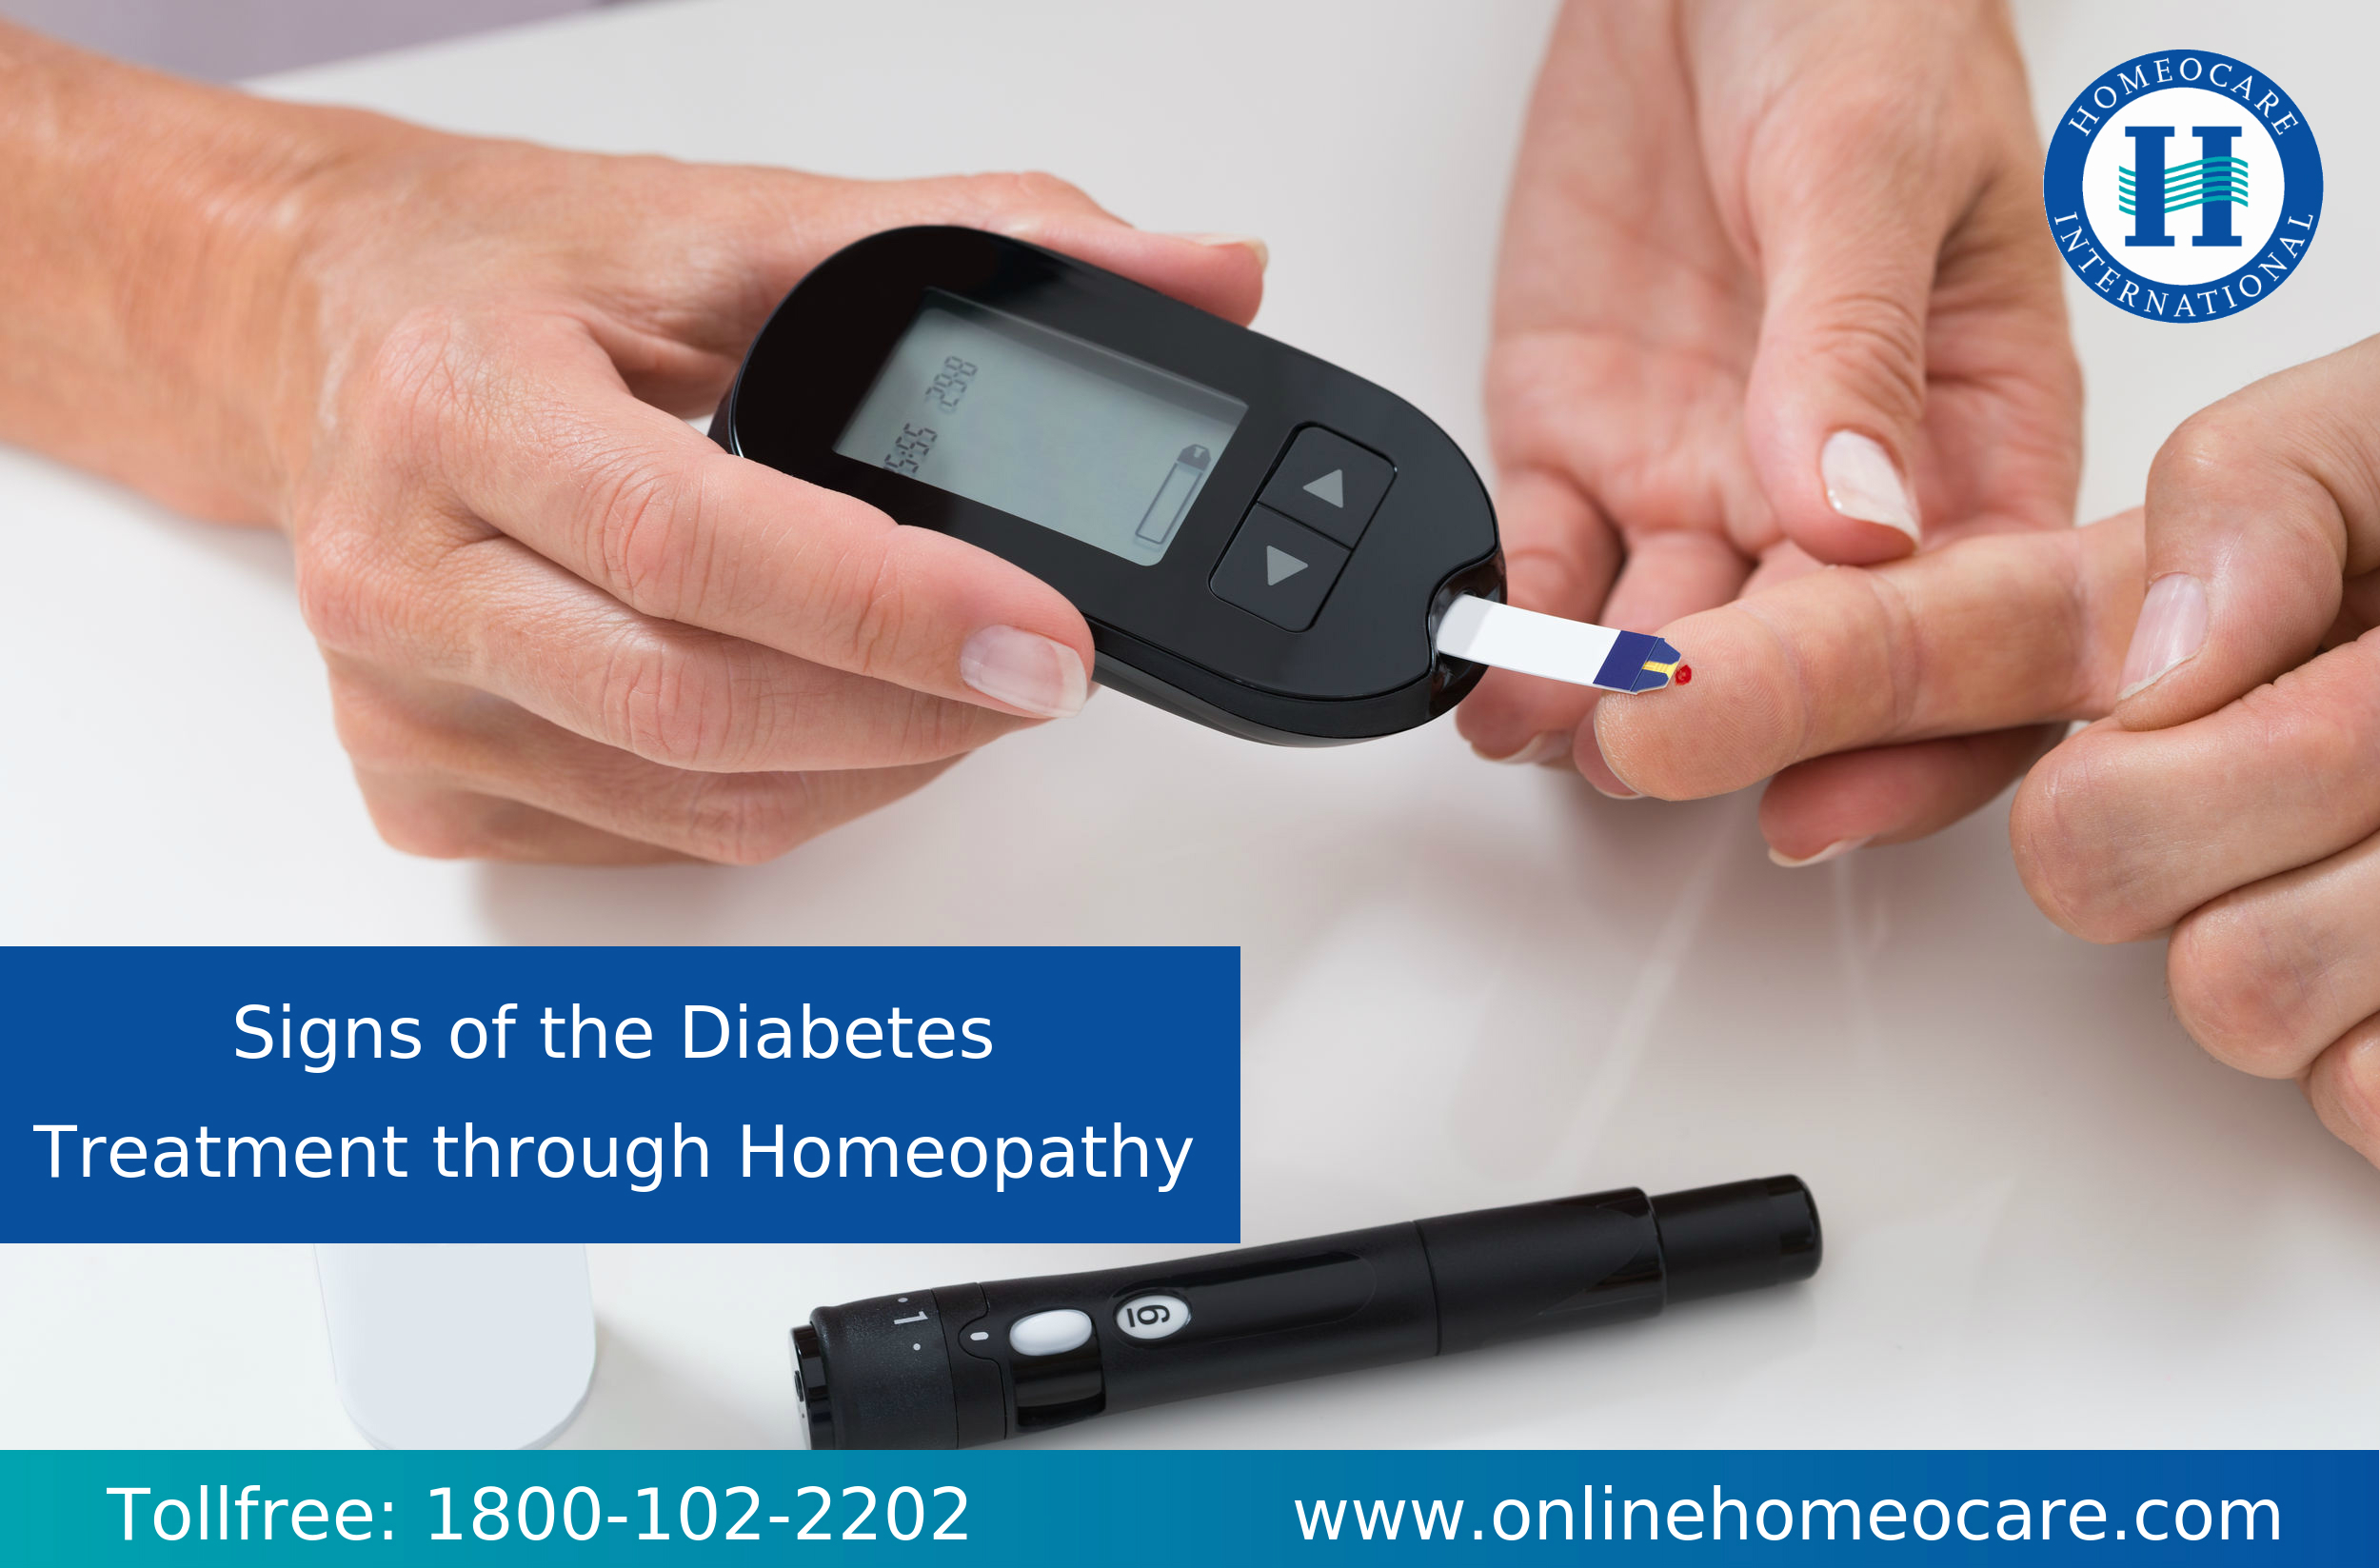 Signs of the Diabetes and Treatment through Homeopathy